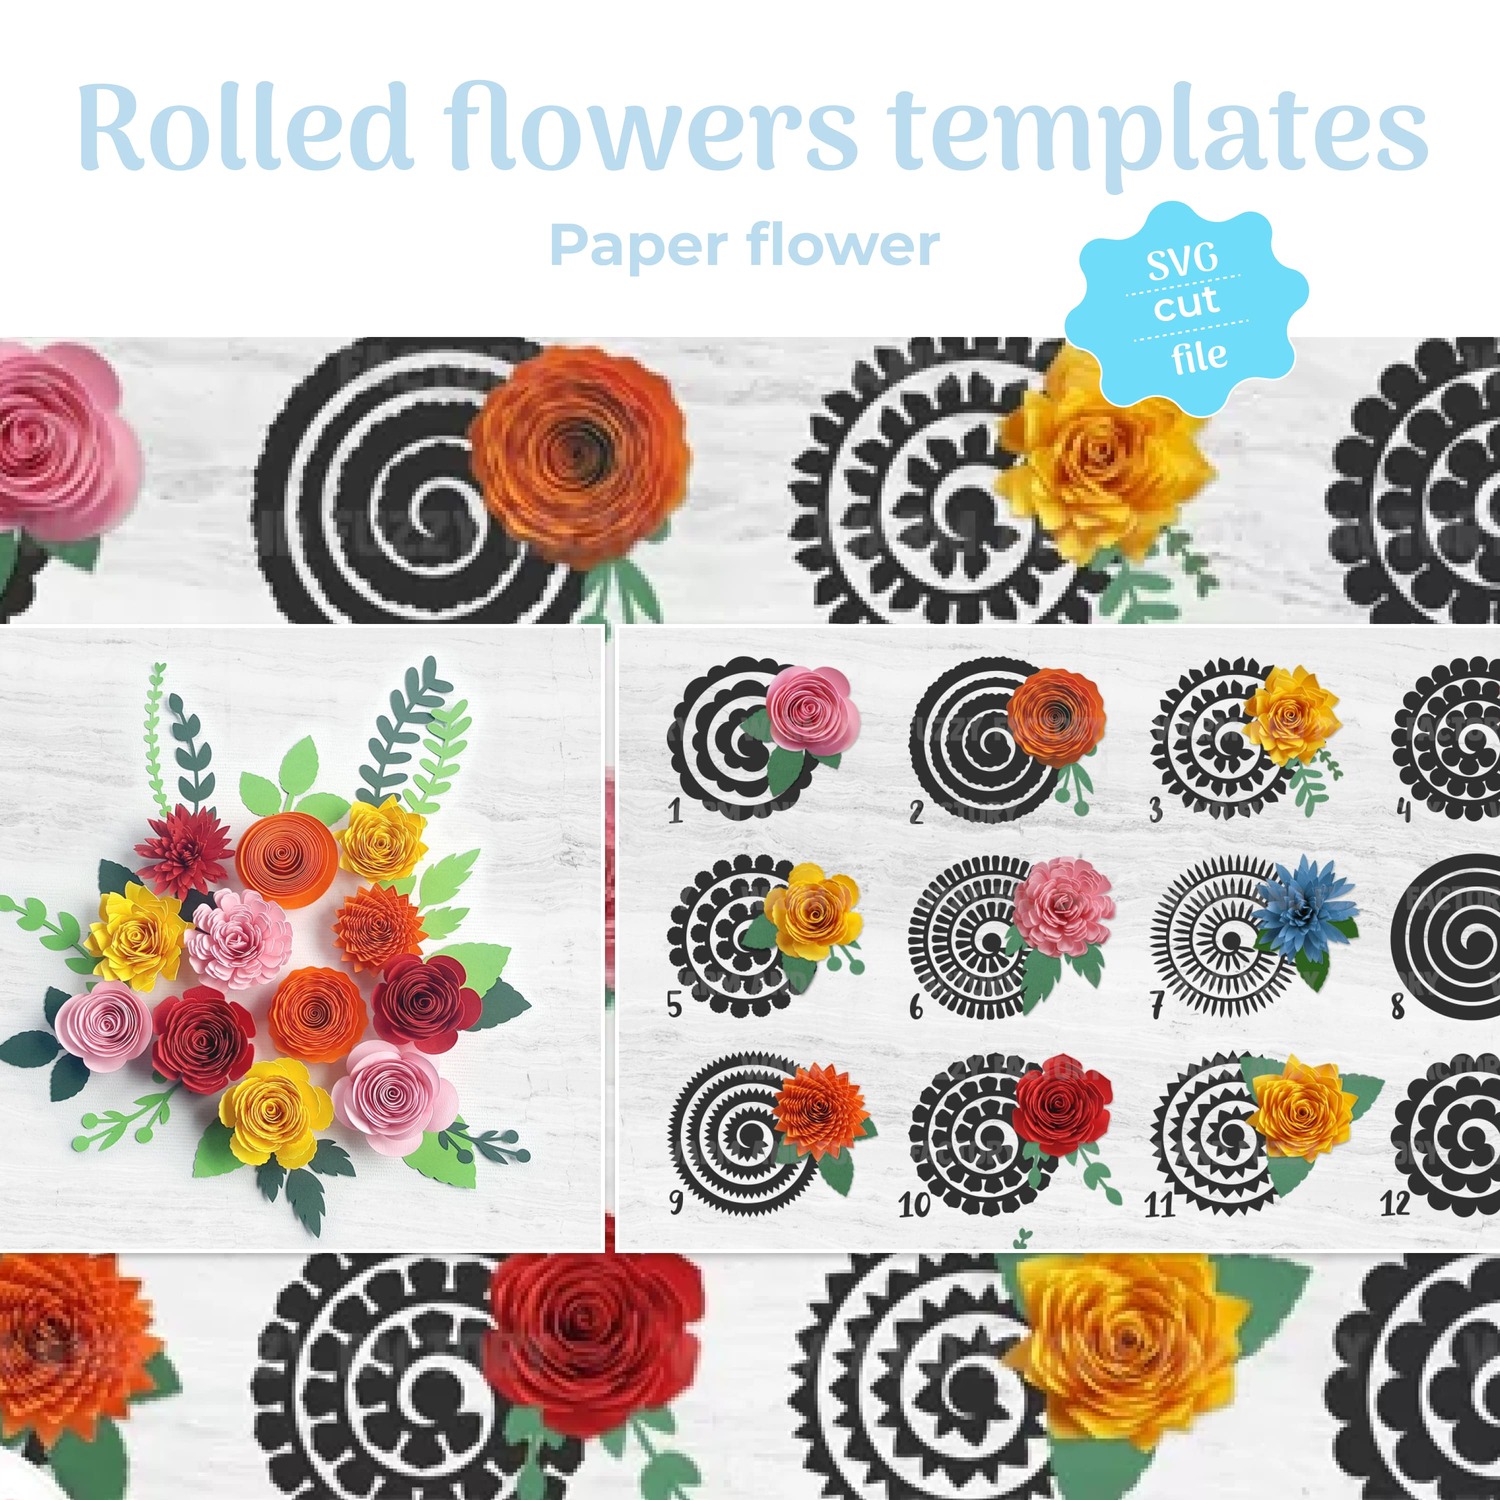 Rolled flower svg, Paper flower template | SVG Cut File main cover.